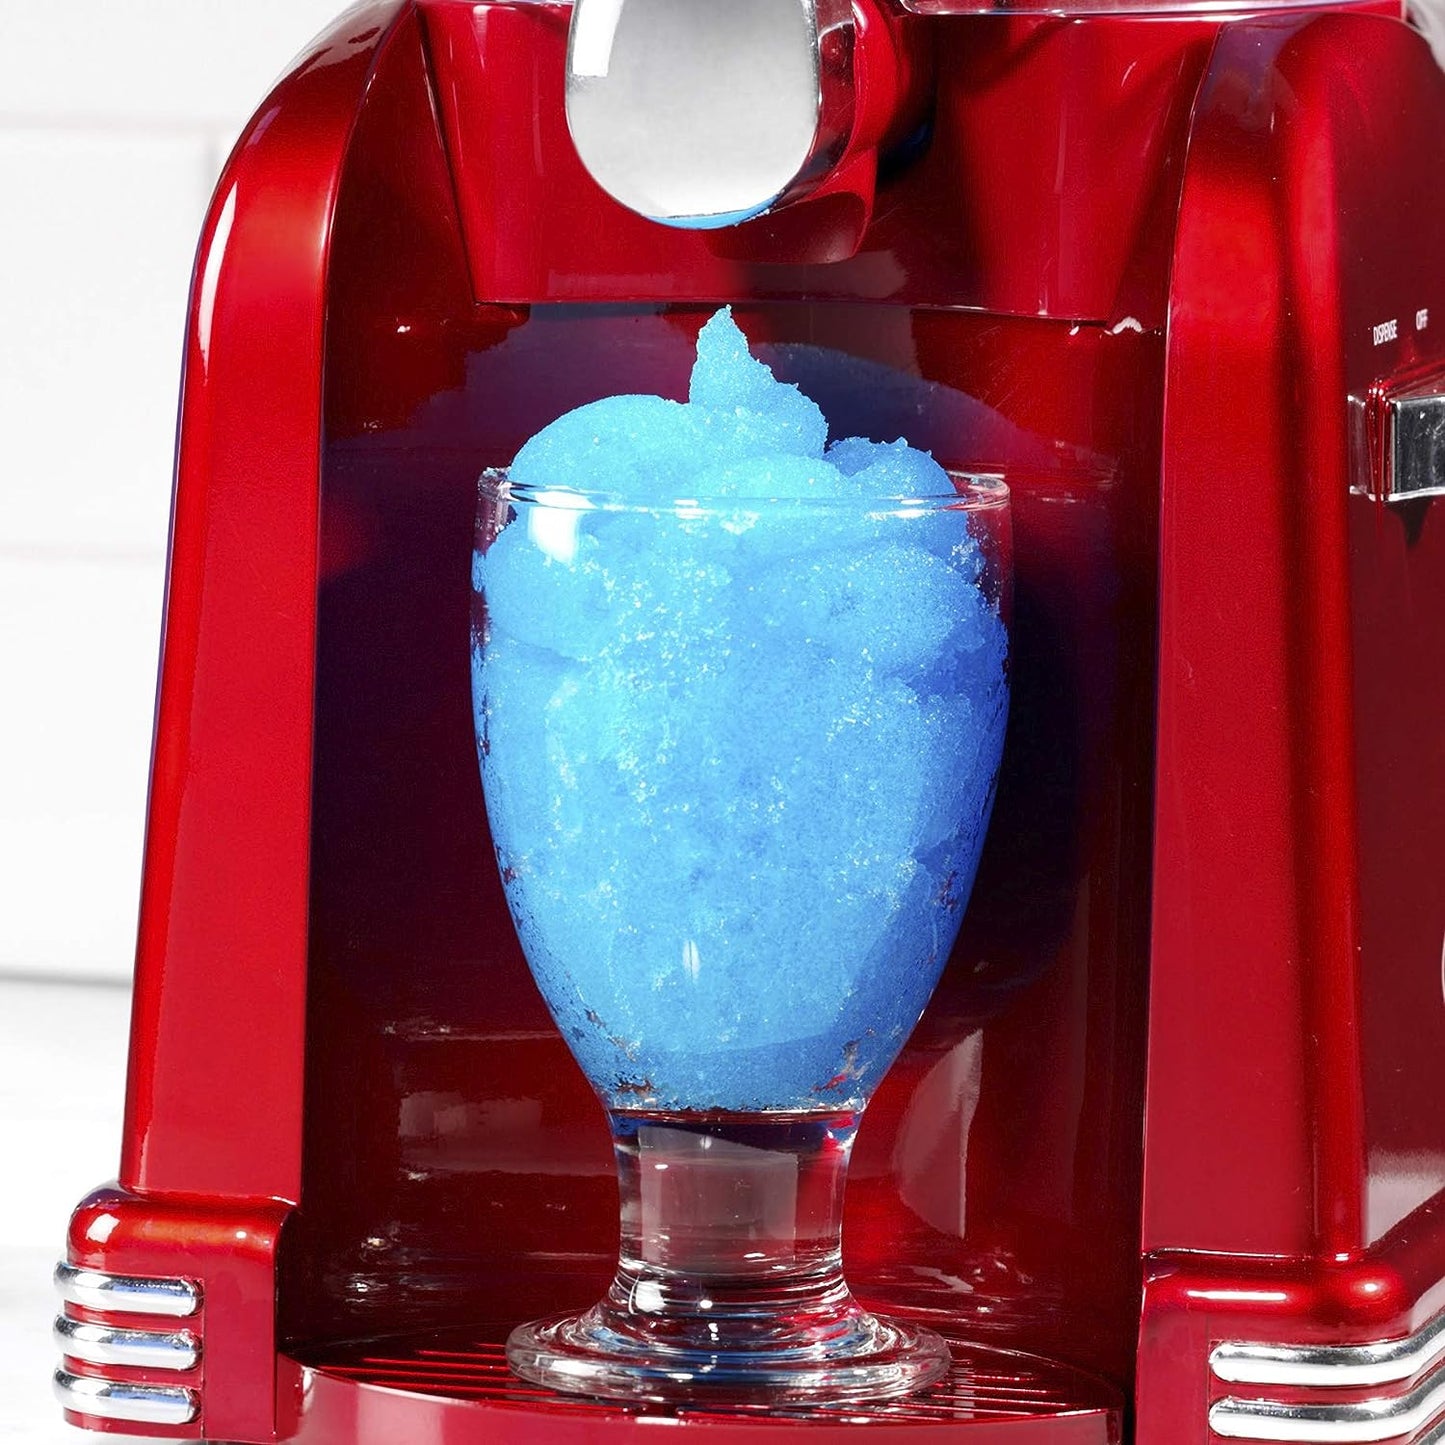 Great Frozen Drink Maker and Margarita Machine for Home - 32-Ounce Slushy Maker with Stainless Steel Flow Spout - Easy to Clean and Double Insulated - Retro Red